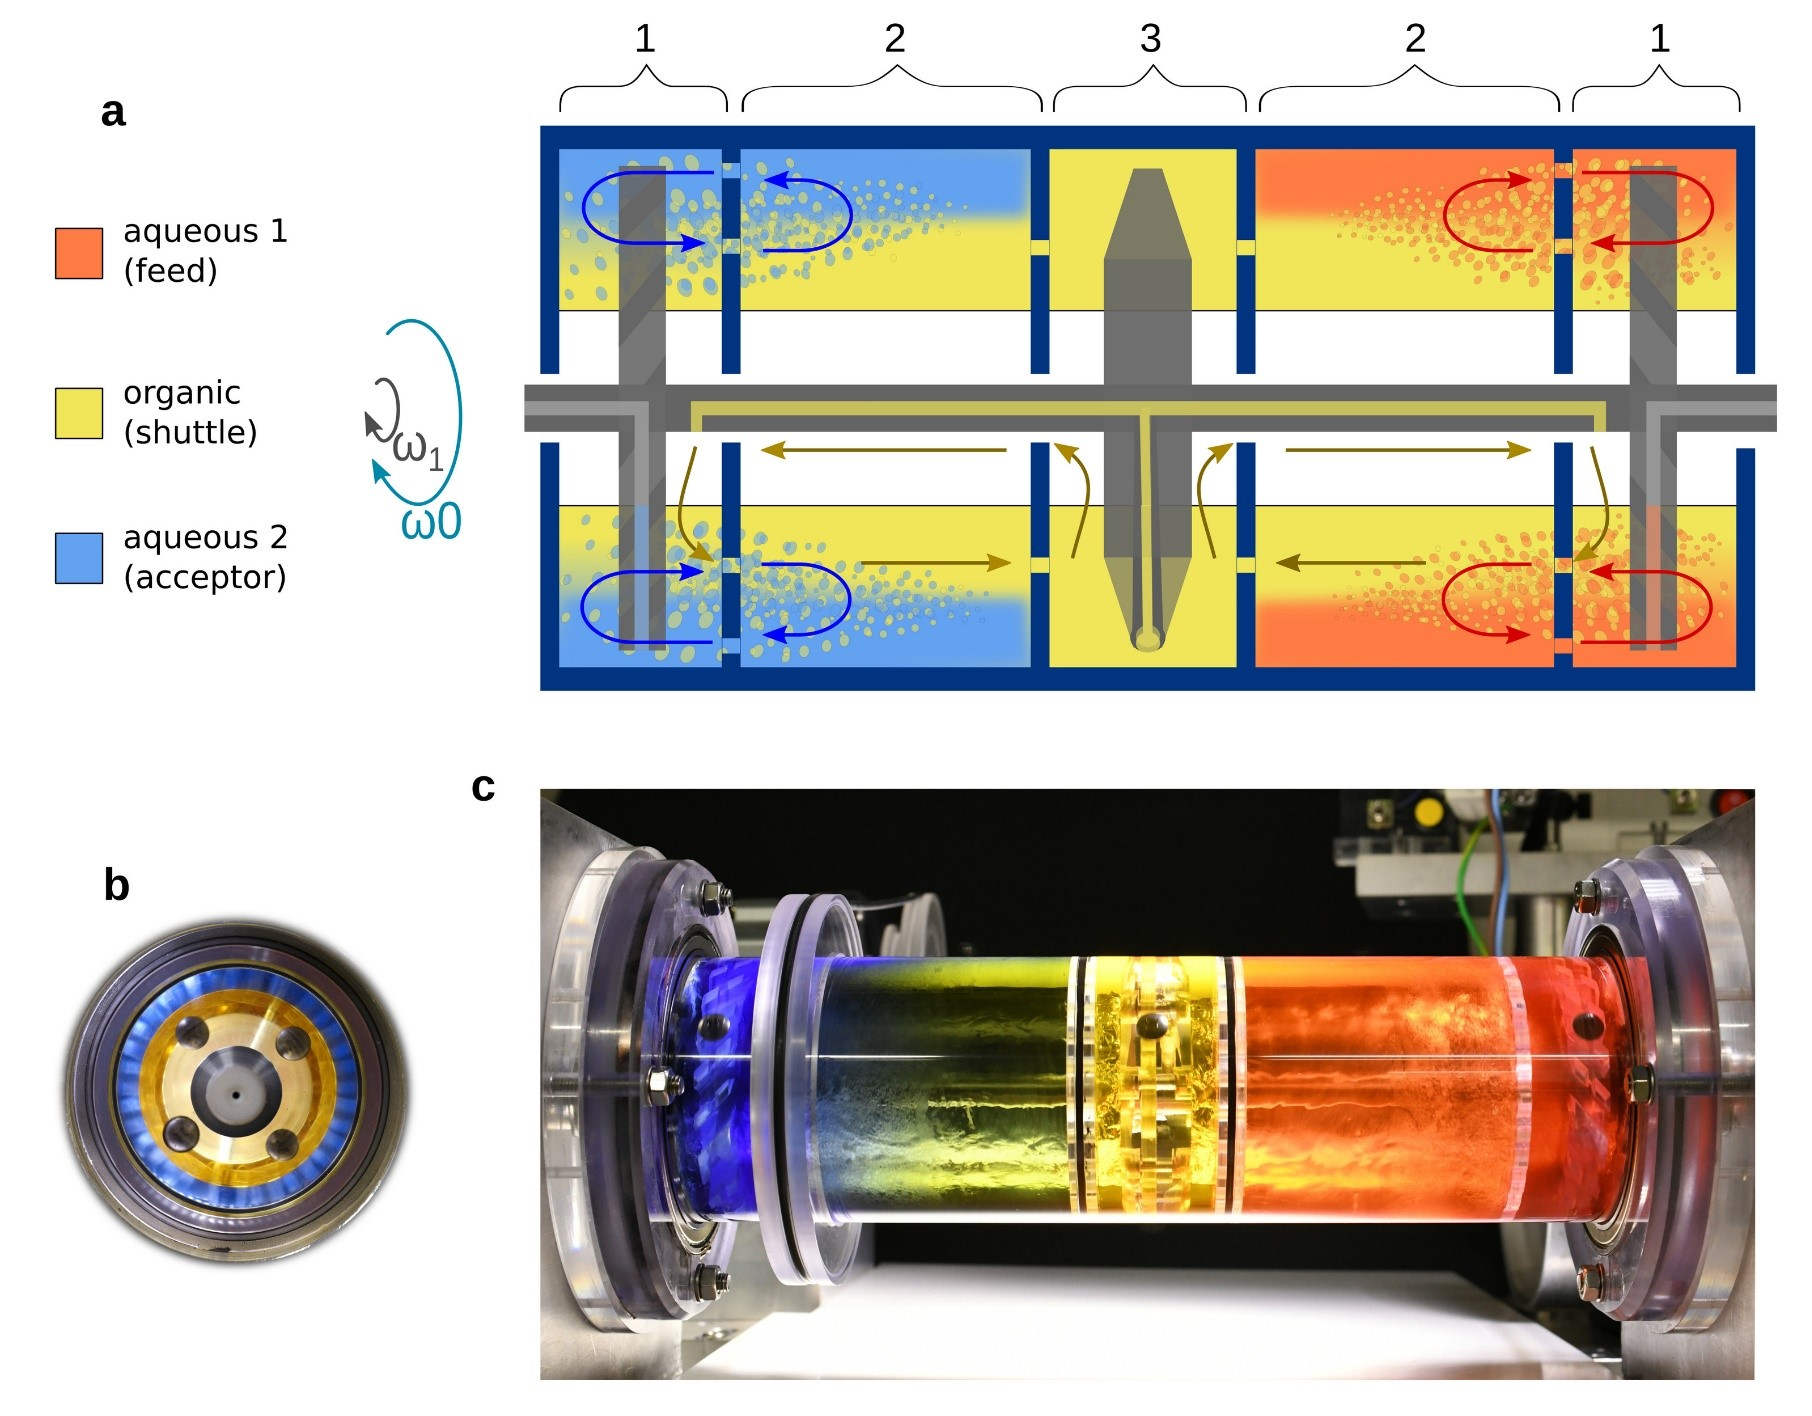 Figure 1. Segmented concentric-liquid reactor, a) cross-section of the reactor loaded with liquids, b) front view (along the axis of rotation) photograph of the actual rotor in the non-stirring mode, and c) side view of the rotor with the same content but in the stirring mode.
        